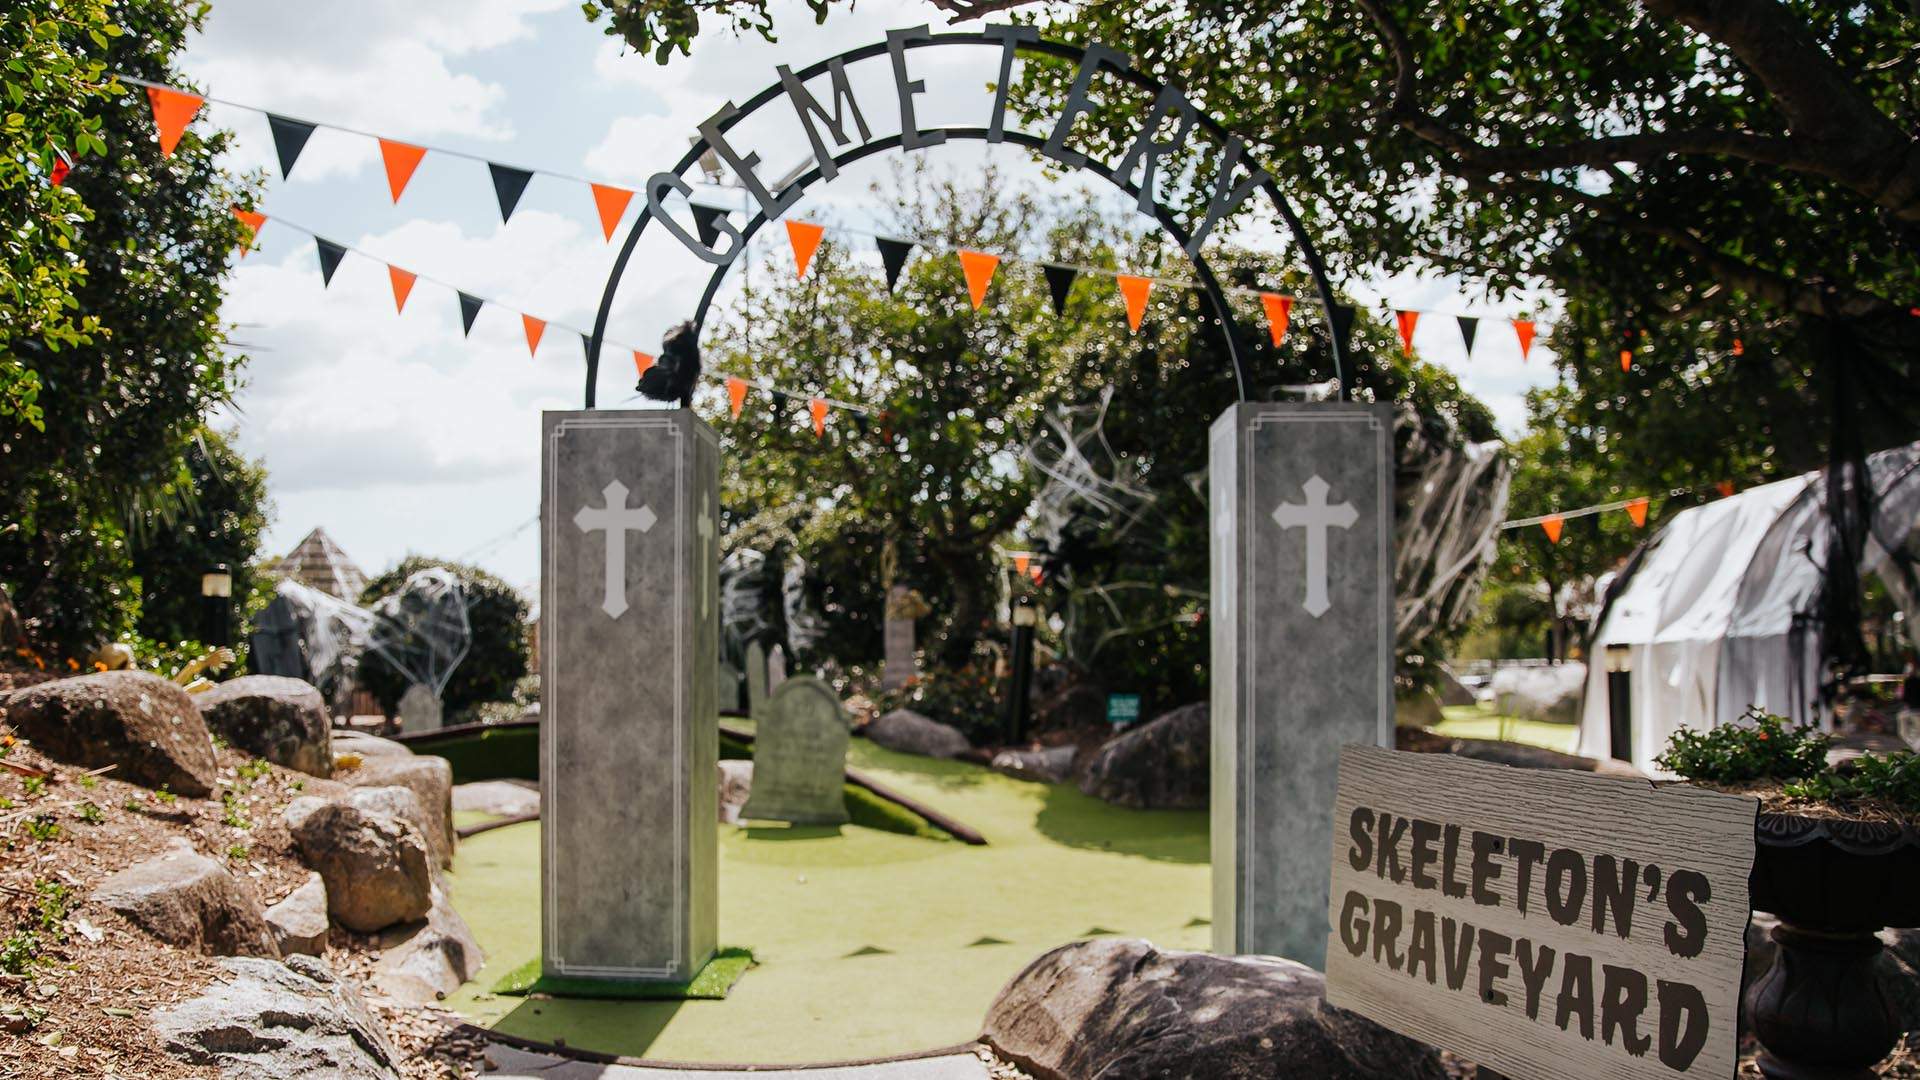 Victoria Park Is Bringing Back Its Halloween-Themed Mini Golf Course — This Time with Creepy Clowns